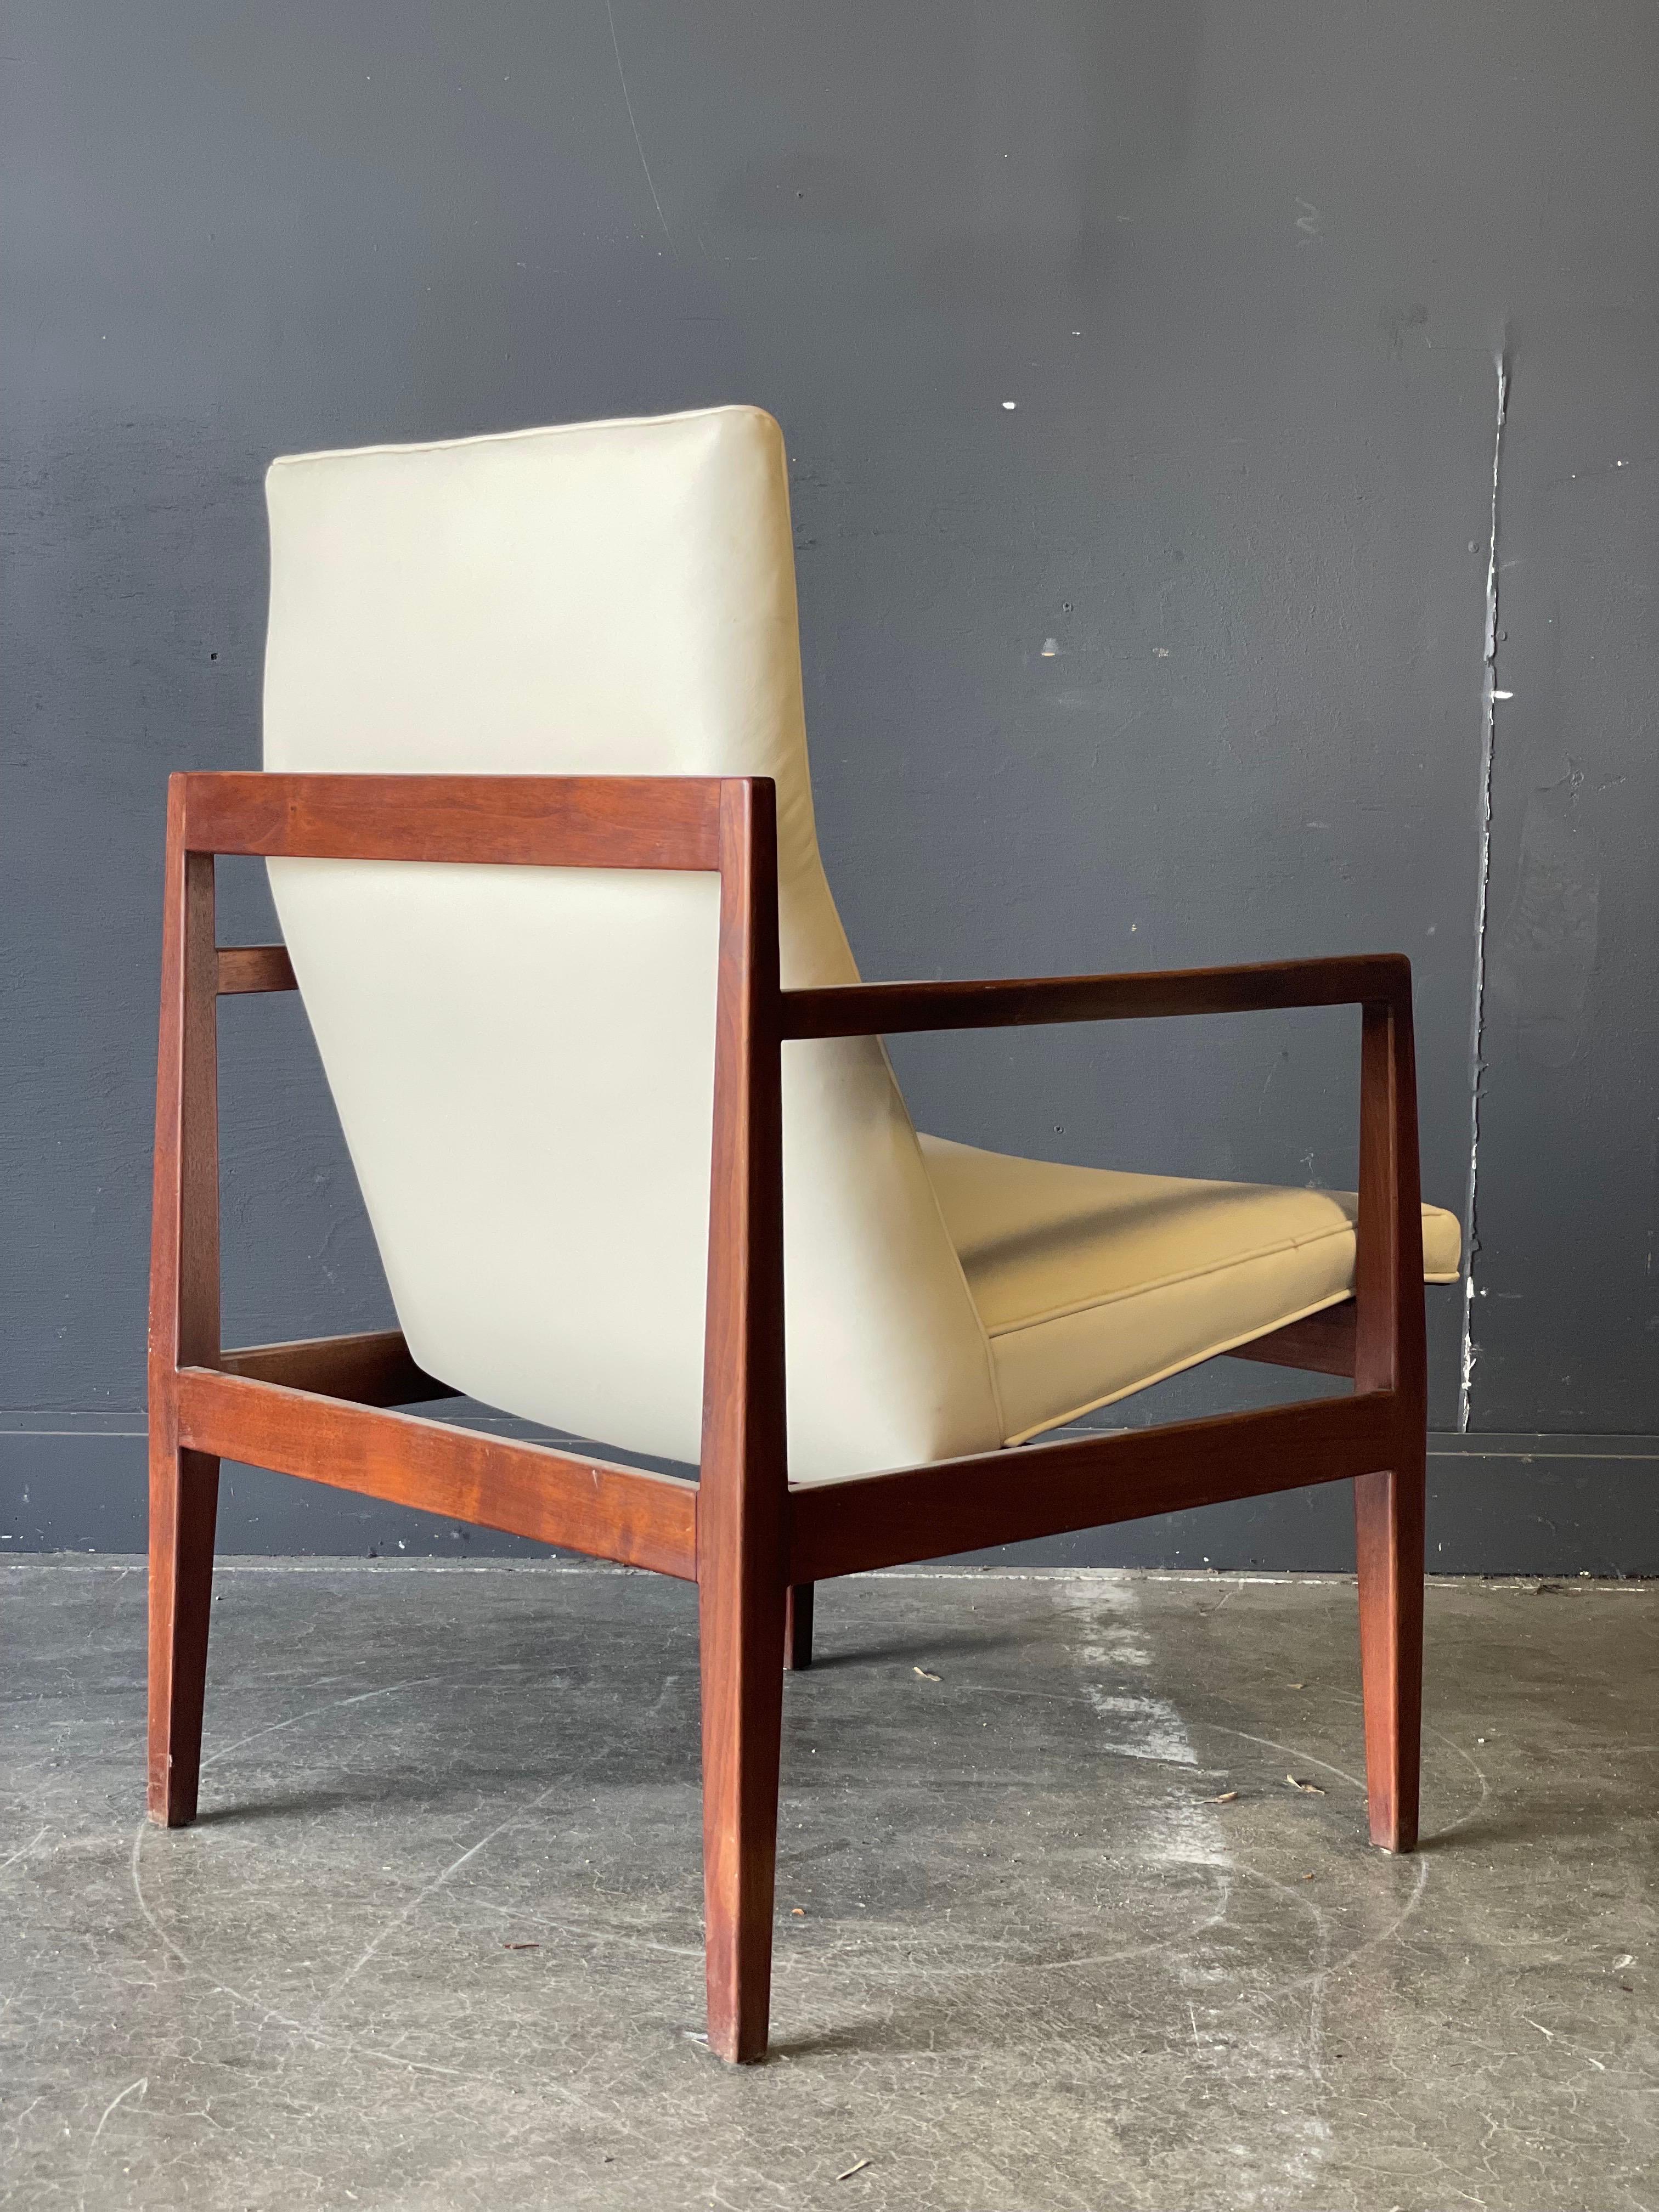 A classic Jens Risom mid century open arm chair circa 1965. Upholstered with a white leather seat. Beautiful carved walnut is ergonomically designed for your comfort and visual pleasure.